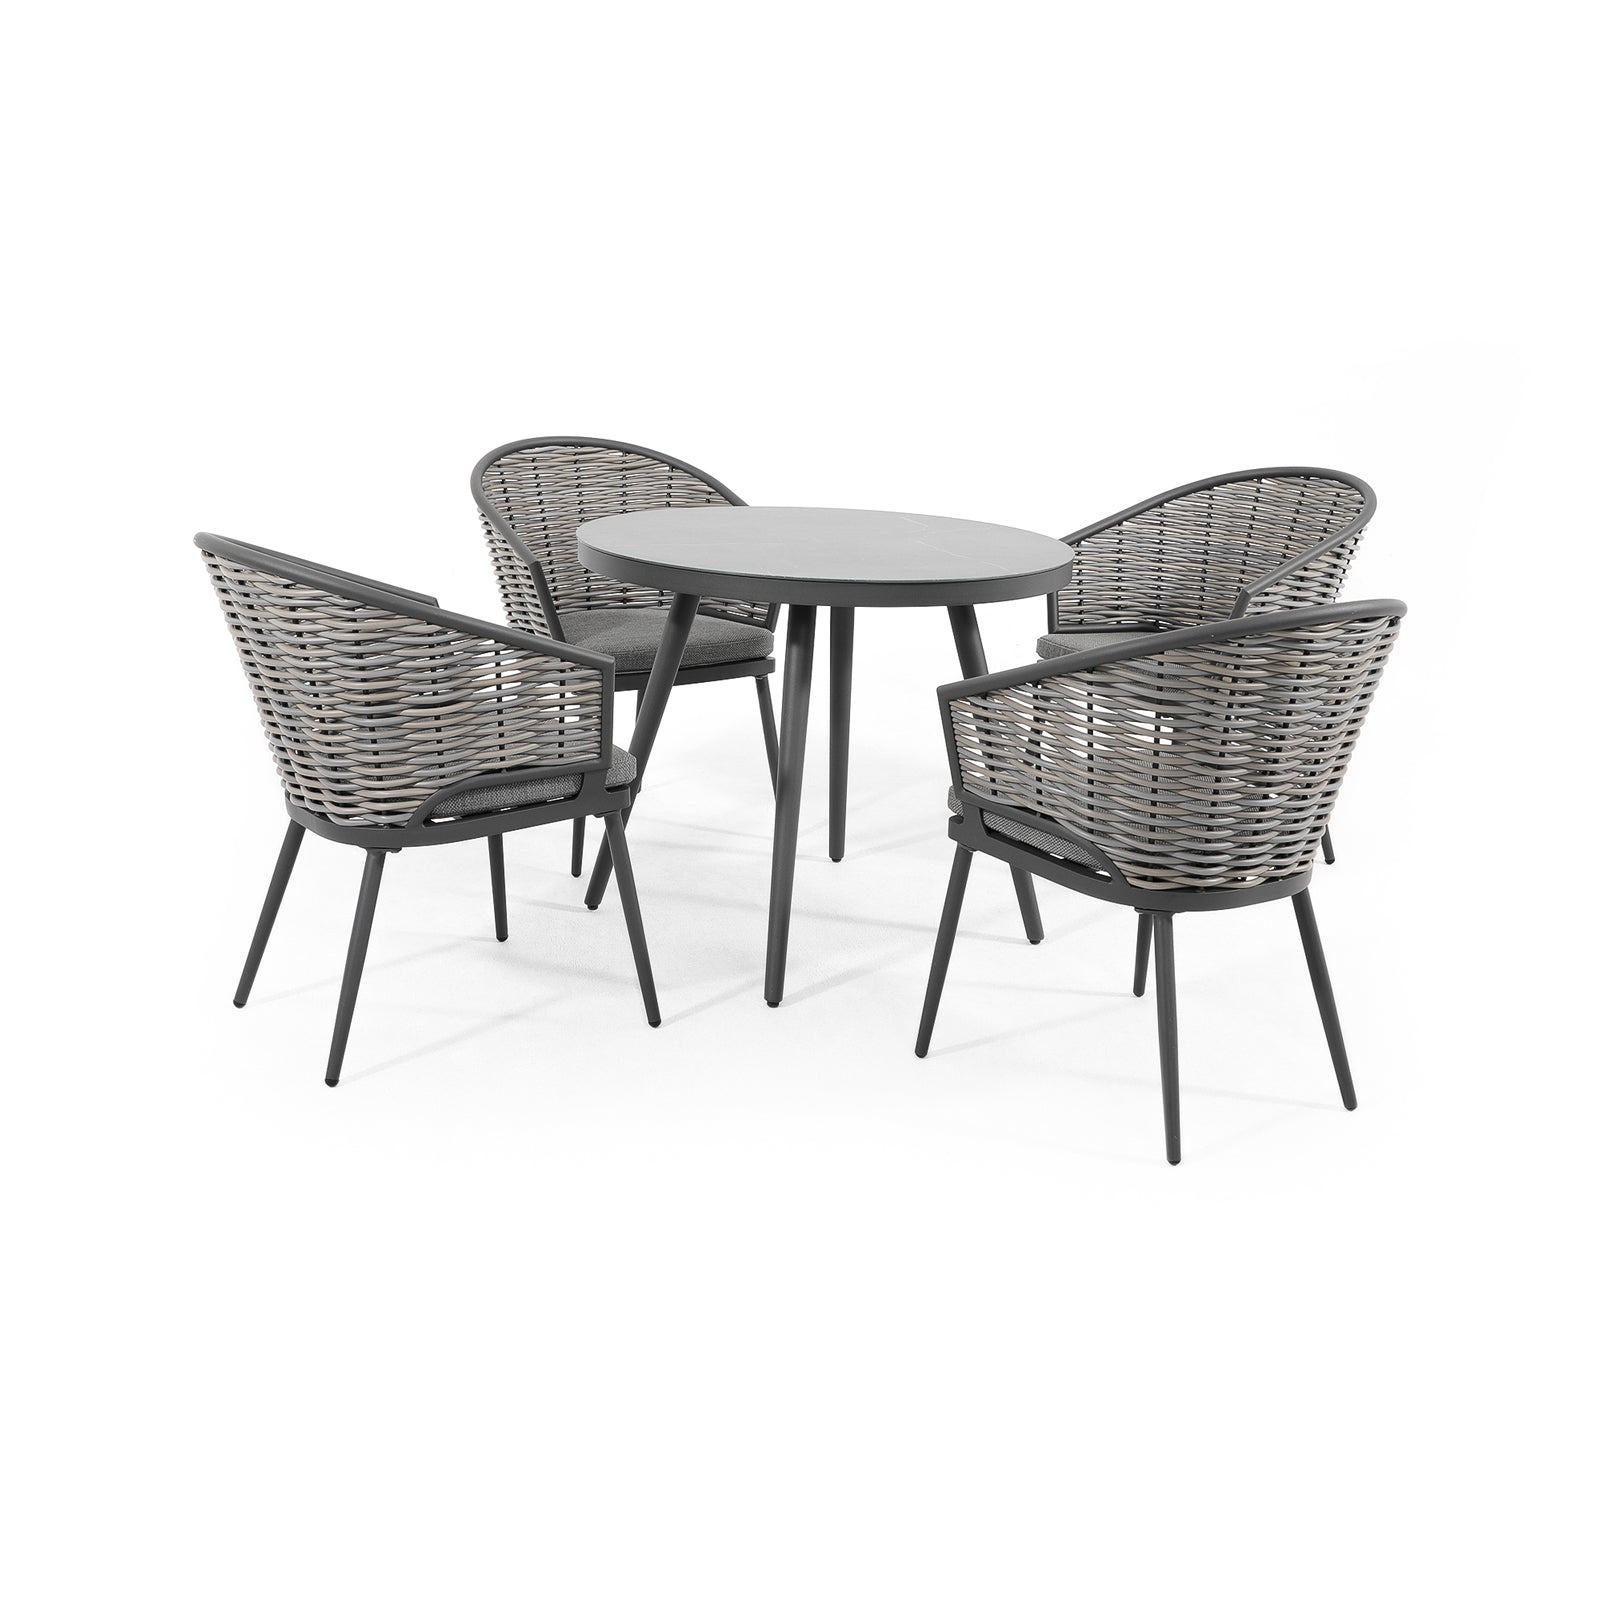 Burano Modern HDPE Wicker Outdoor Furniture, Grey wicker outdoor Dining Set with aluminum frame, 4 wicker chairs with grey cushions , 1 Round aluminum Dining Table - Jardina Furniture